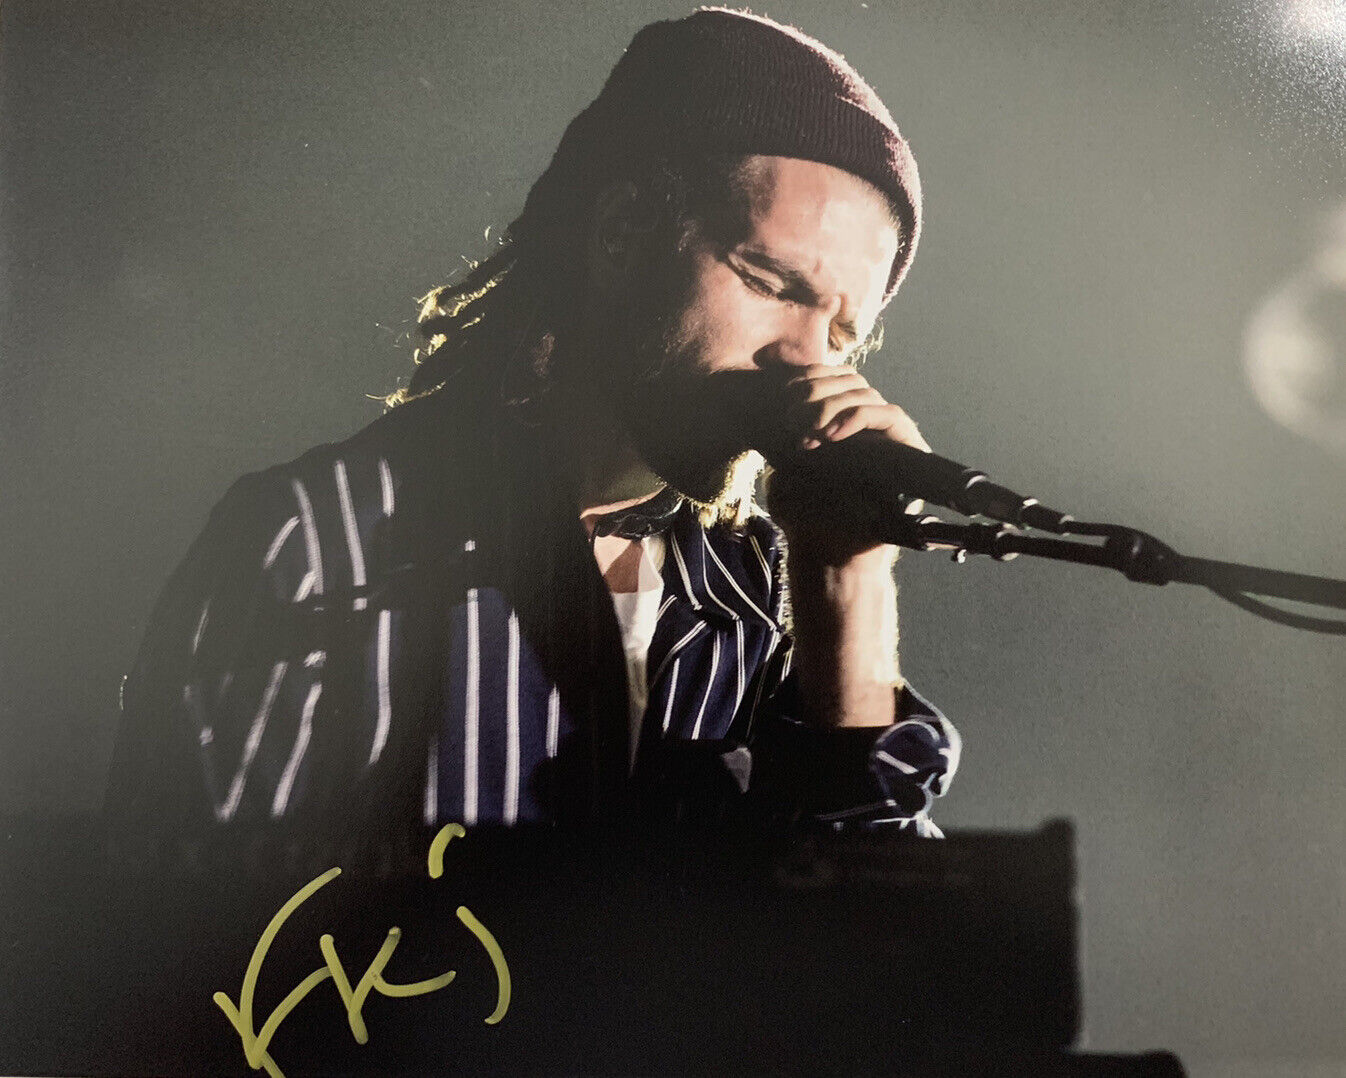 FKJ FRENCH KIWI JUICE HAND SIGNED 8x10 Photo Poster painting AUTOGRAPHED AUTHENTIC RARE